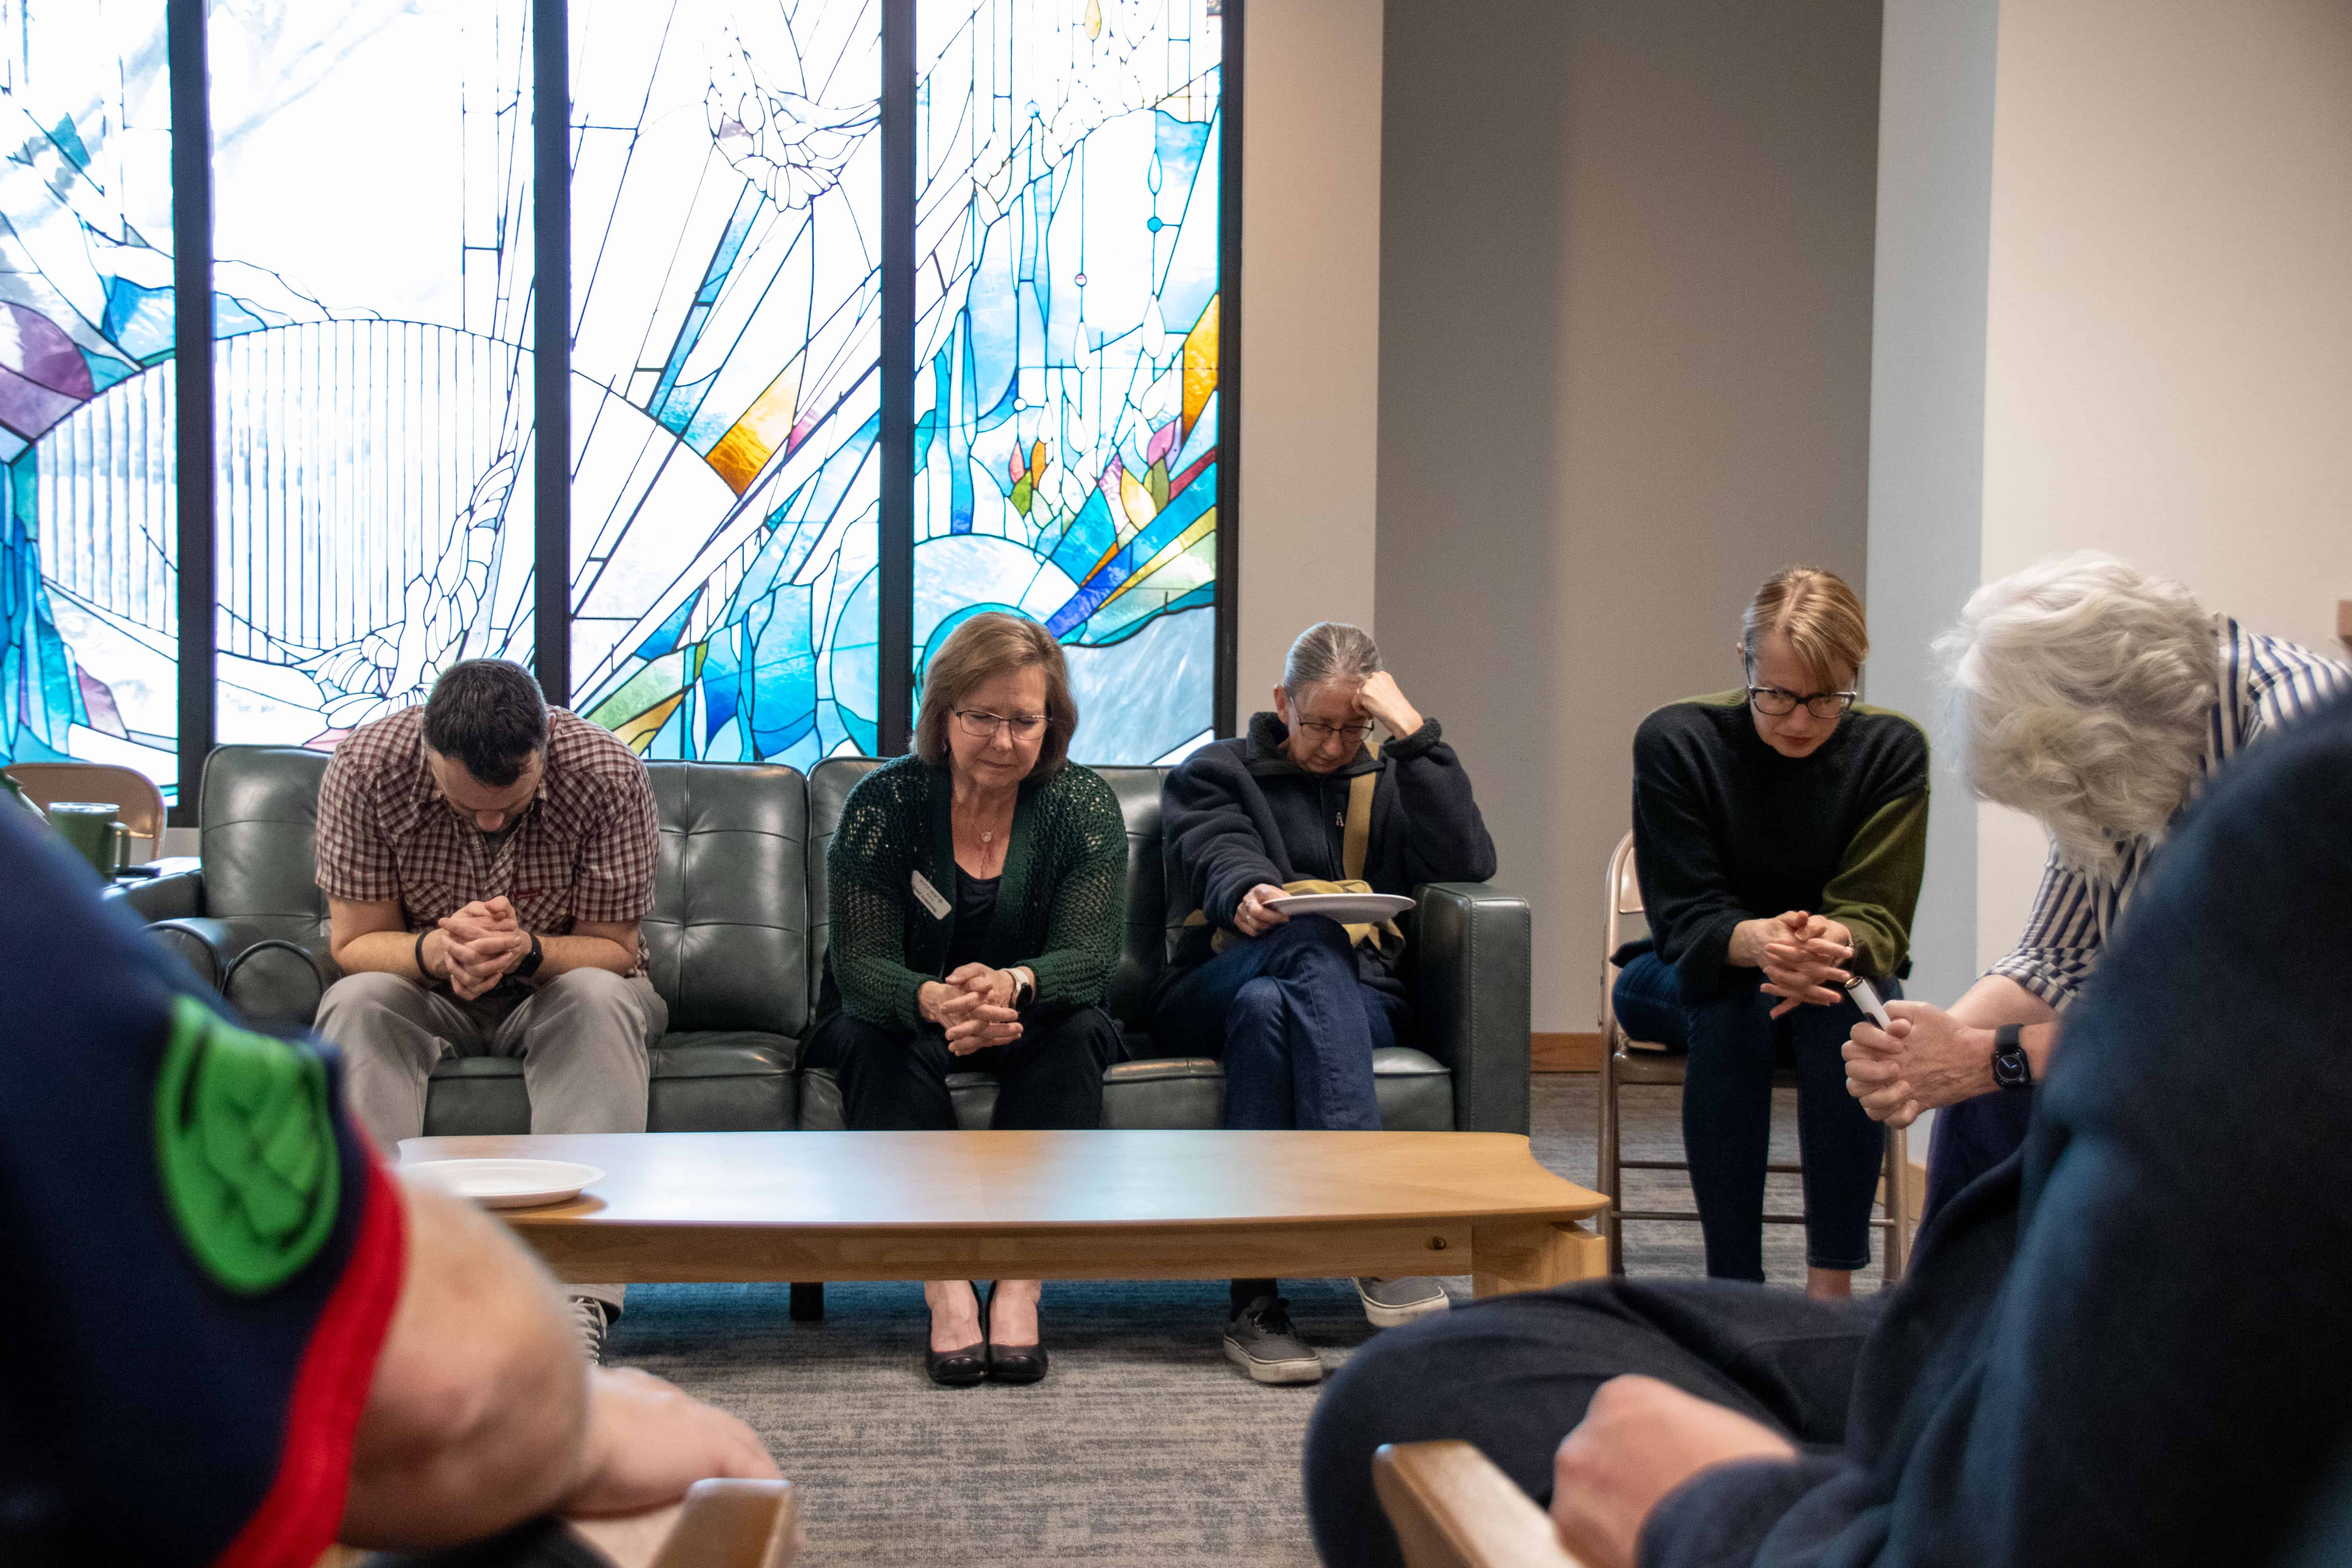 A group of people in prayer for refugees.